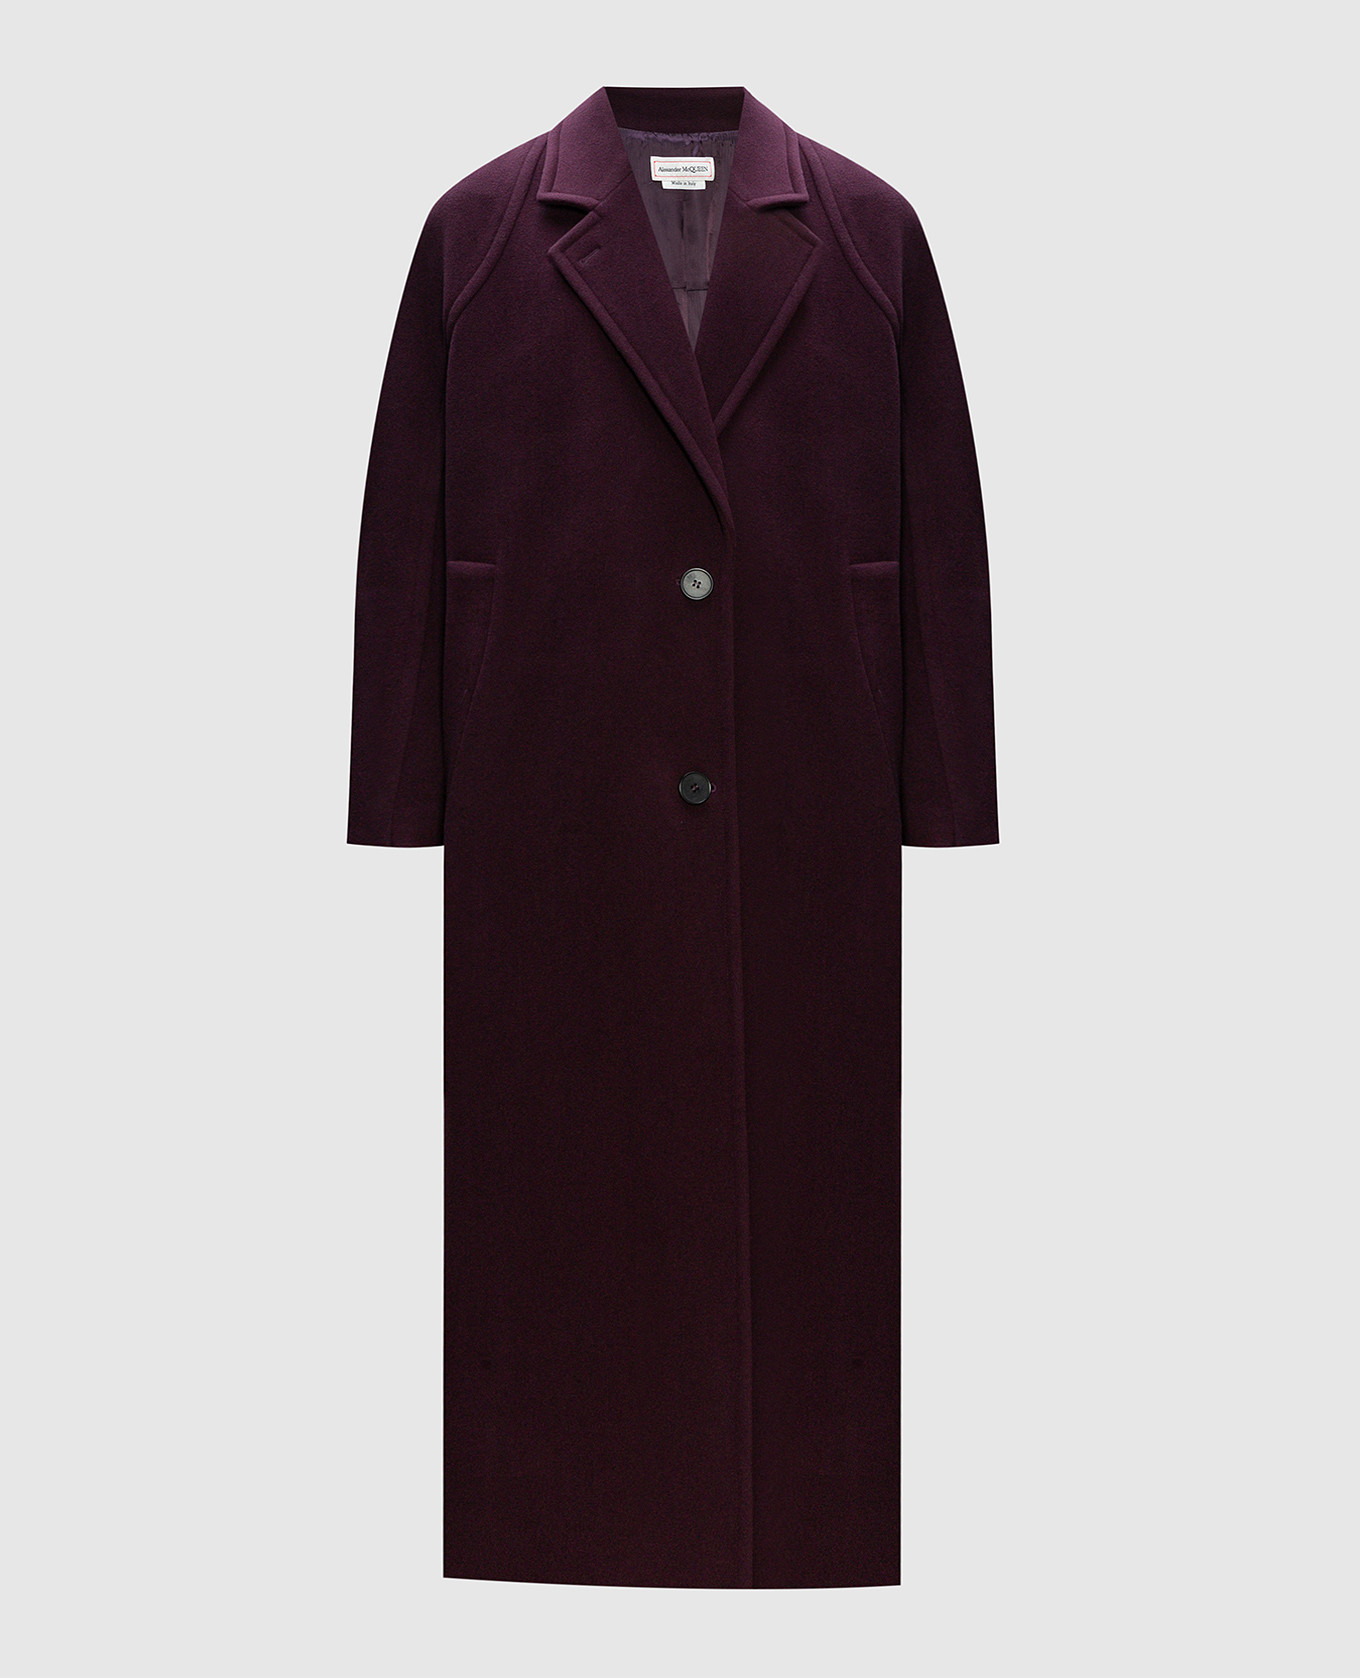 Purple wool and cashmere coat